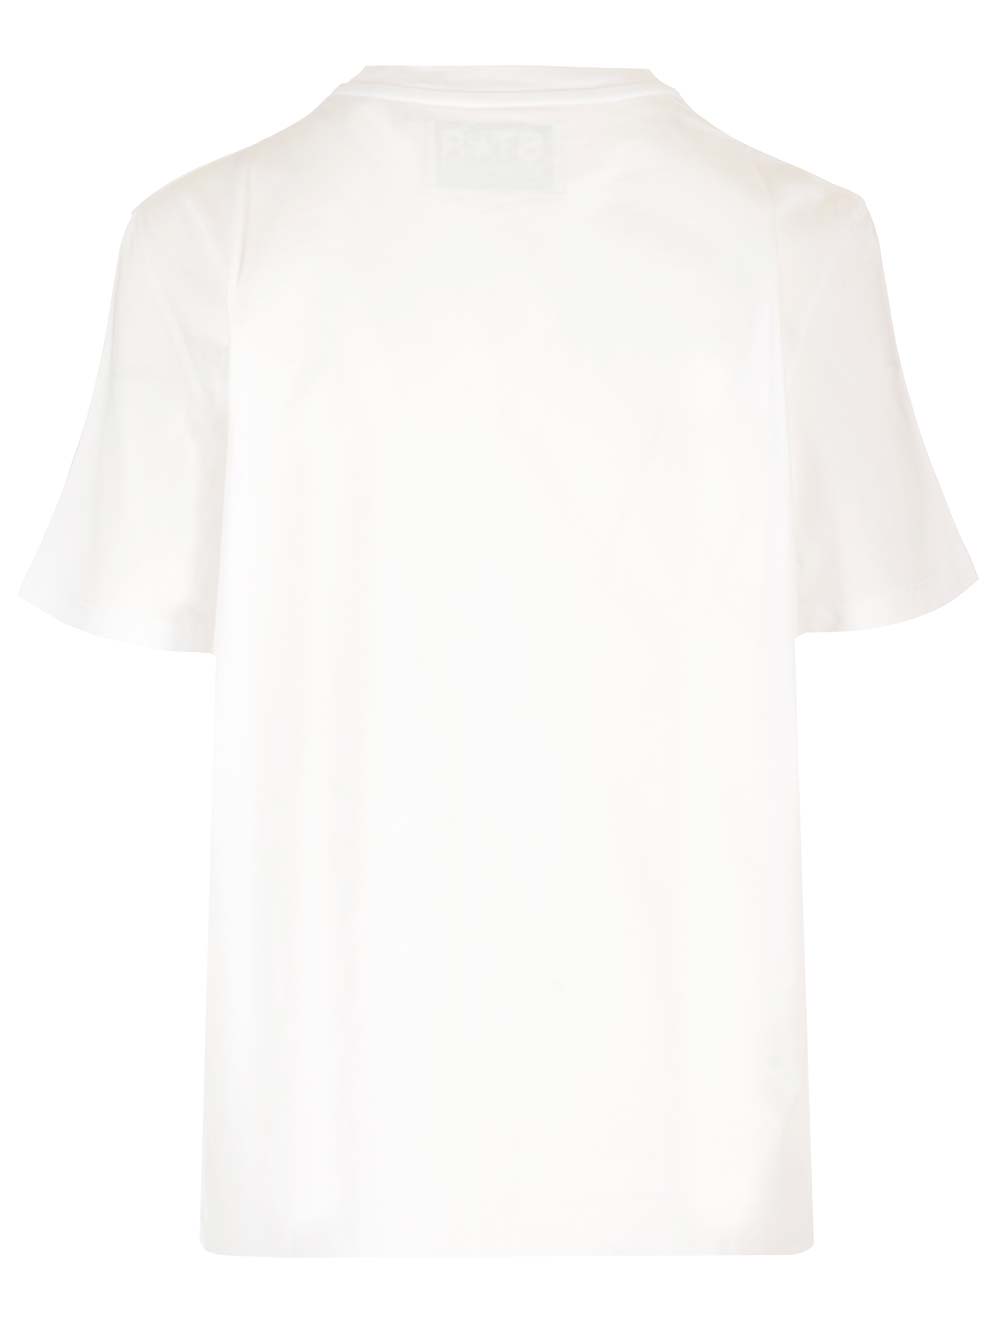 Shop Golden Goose White T-shirt With Black Star